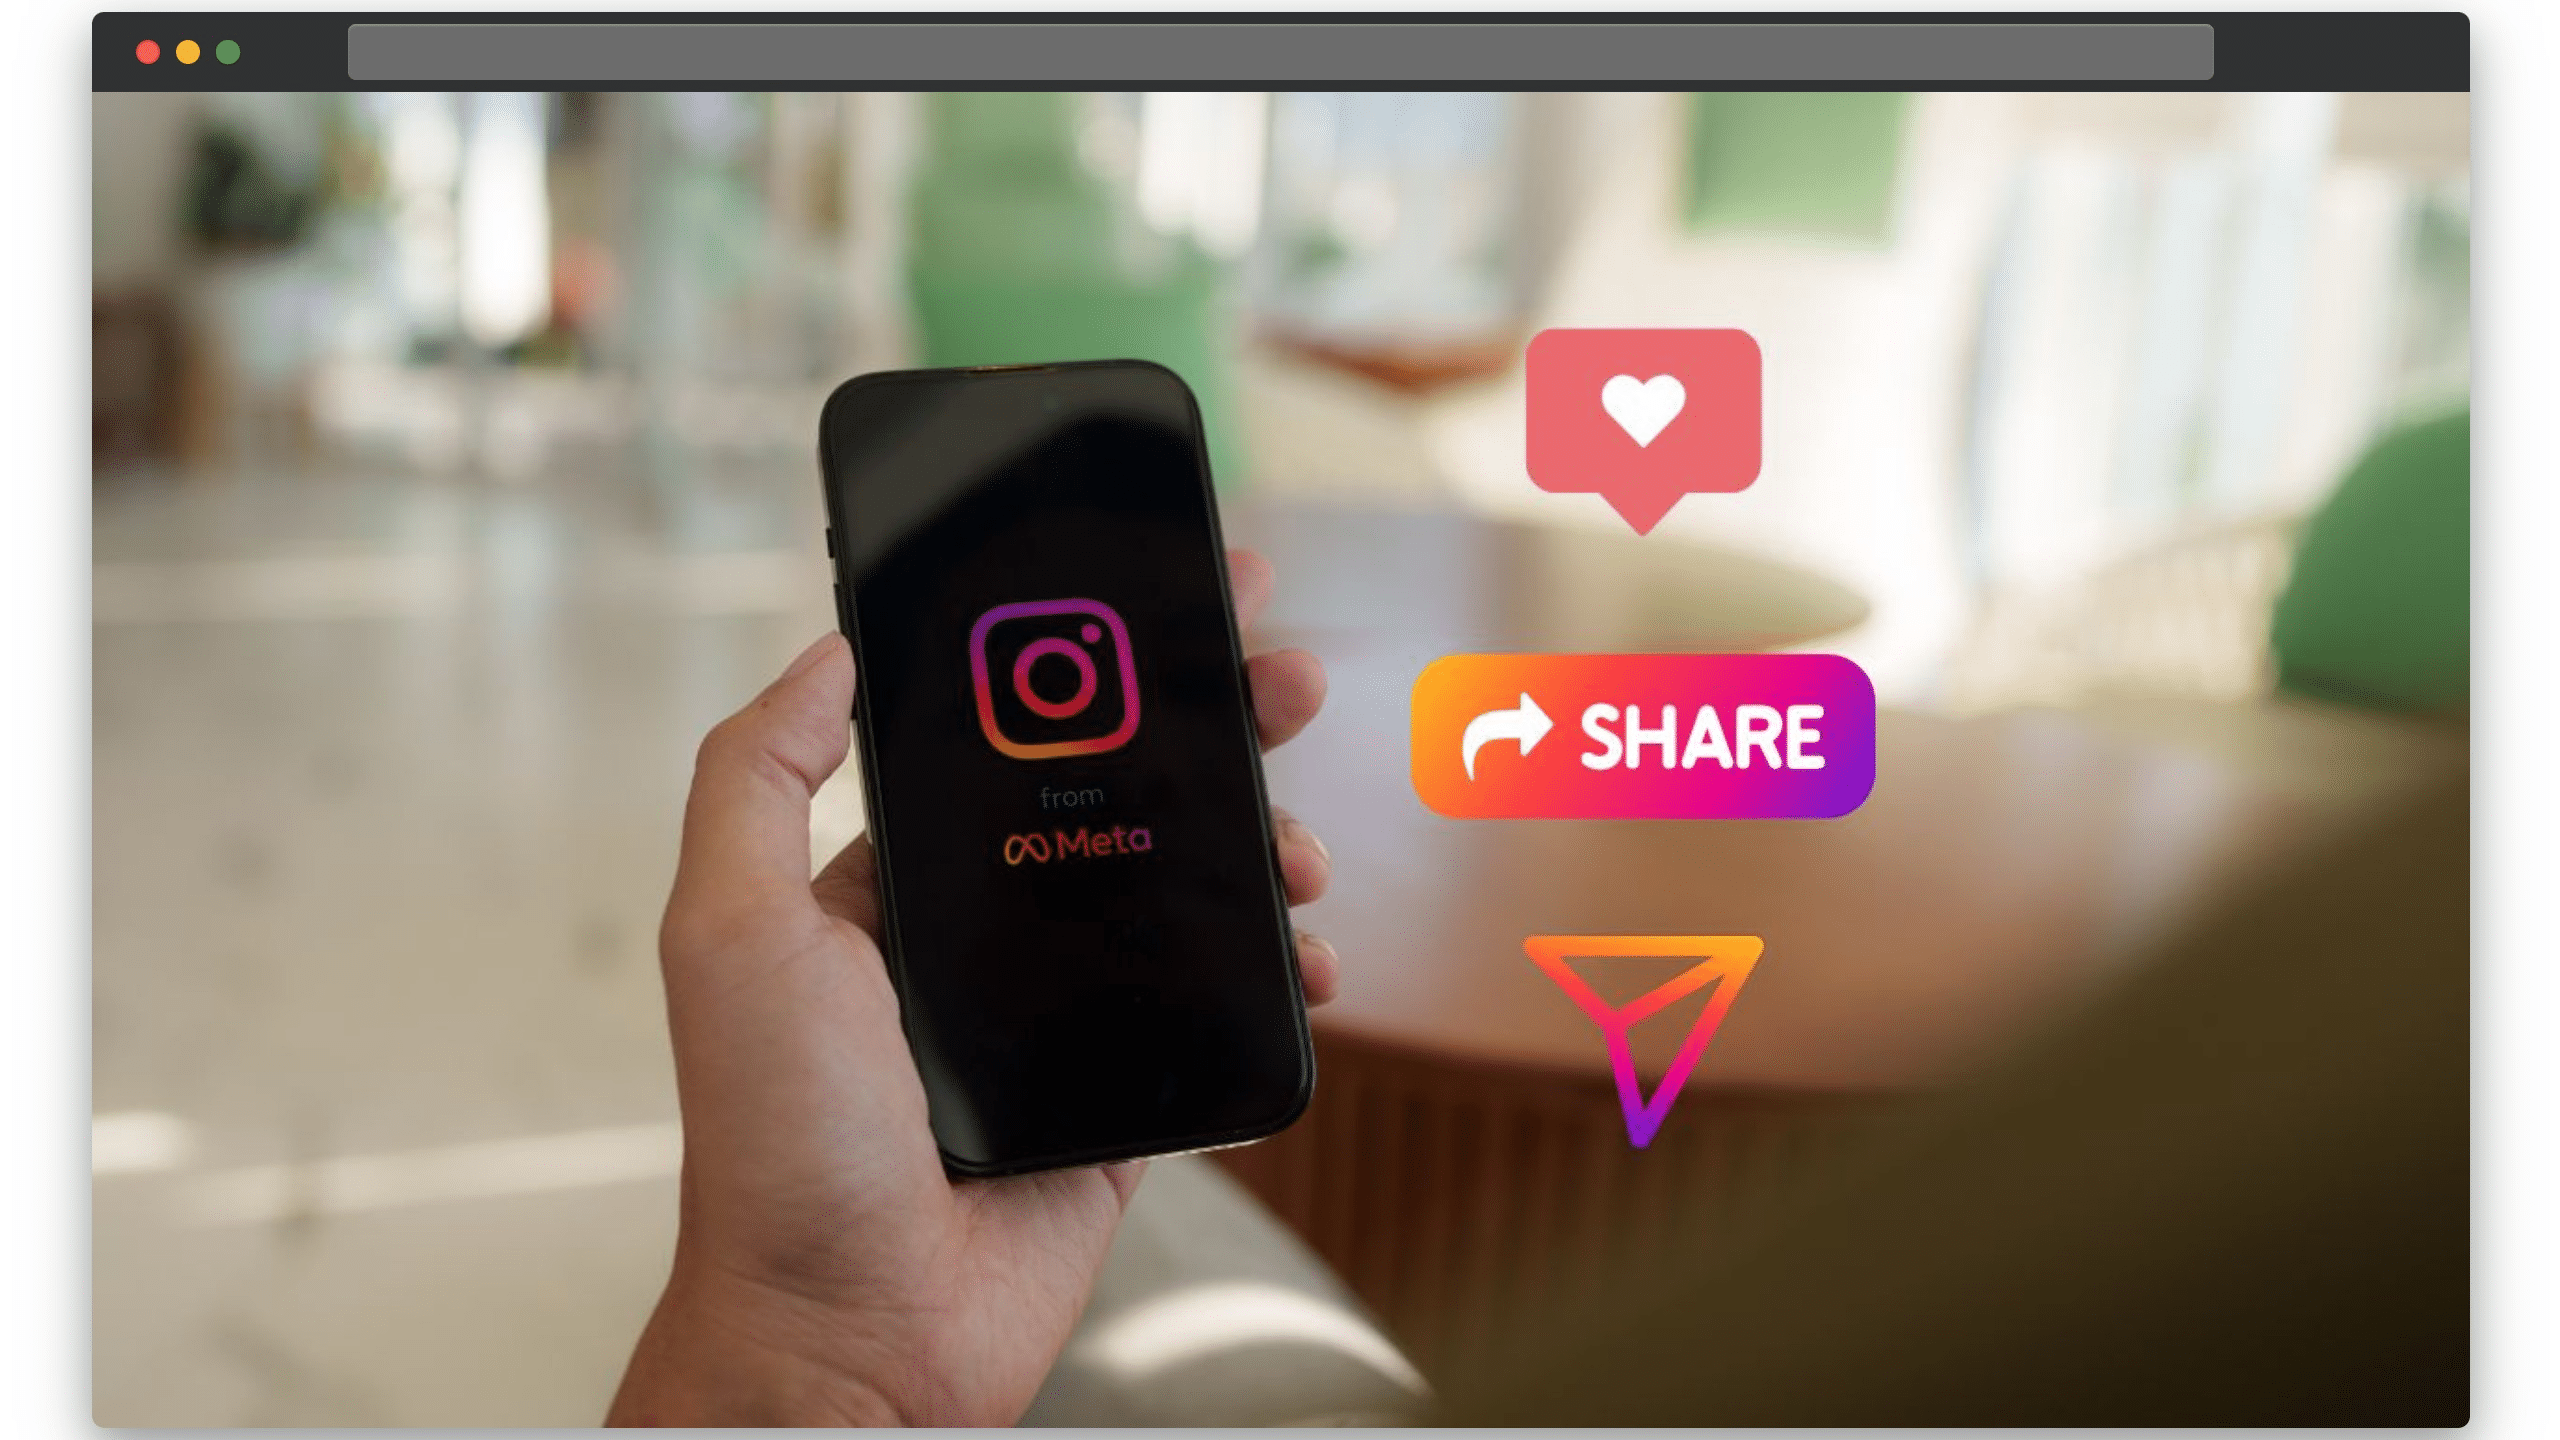 A phone showing the like, share, and messaging engagements on instagram.